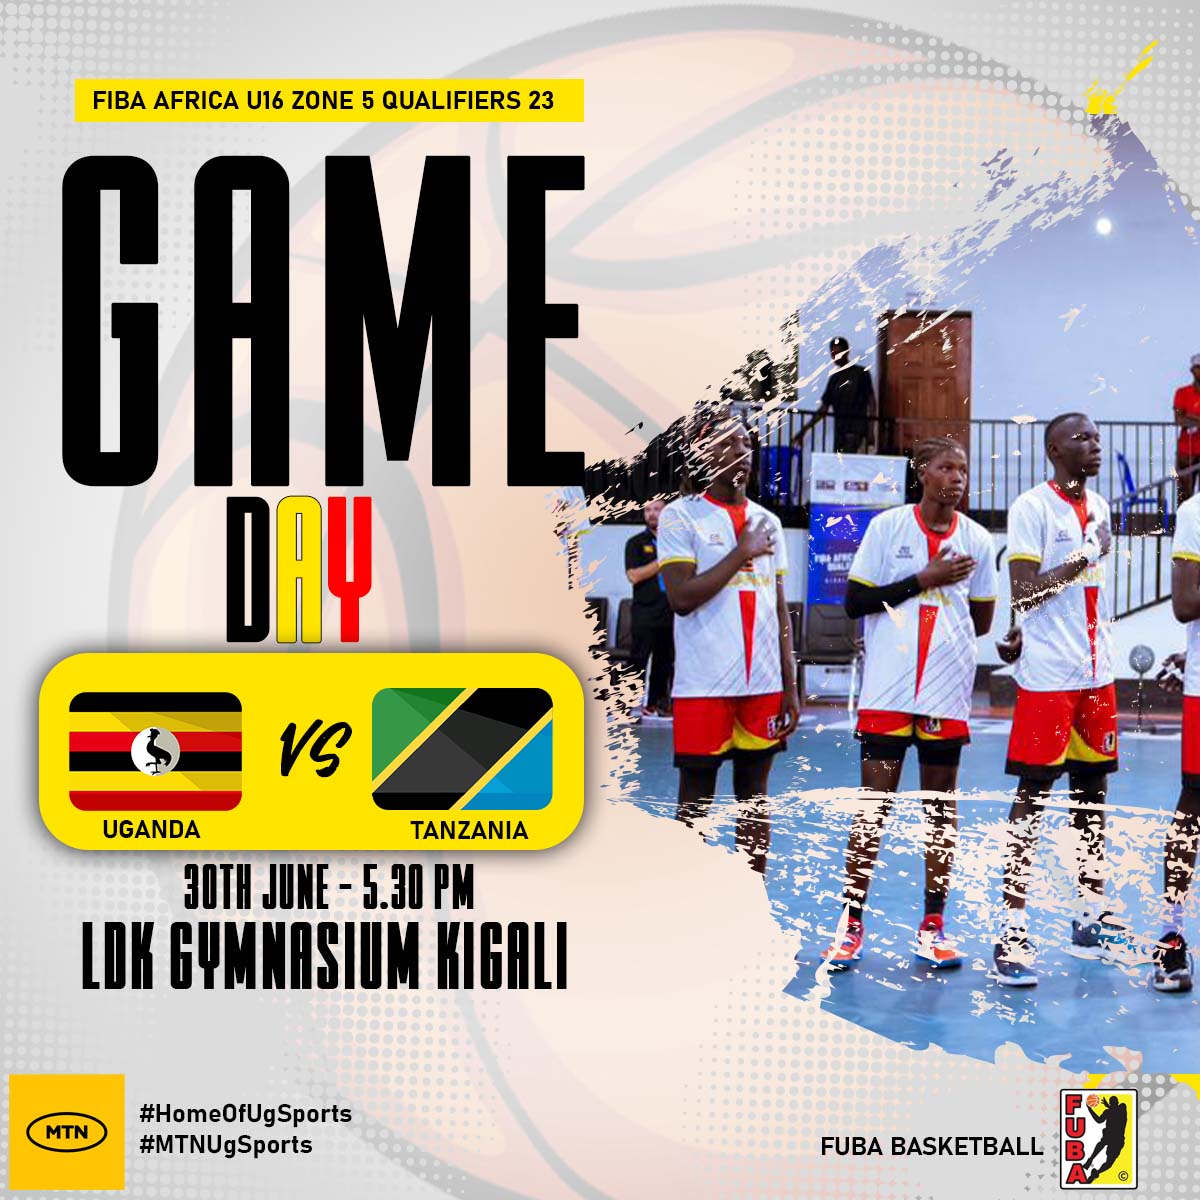 A win today, and the boys will have booked a ticket to Tunisia for the finals joining the U16 Junior Gazelles who have already qualified. Let's rally behind them this evening 🔥🇺🇬
Let's go Ug 

In a special way, we thank @mtnug
🙏🏾🙏🏾

#FubaBasketball
#MTNUgSports | #HomeOfUgSports